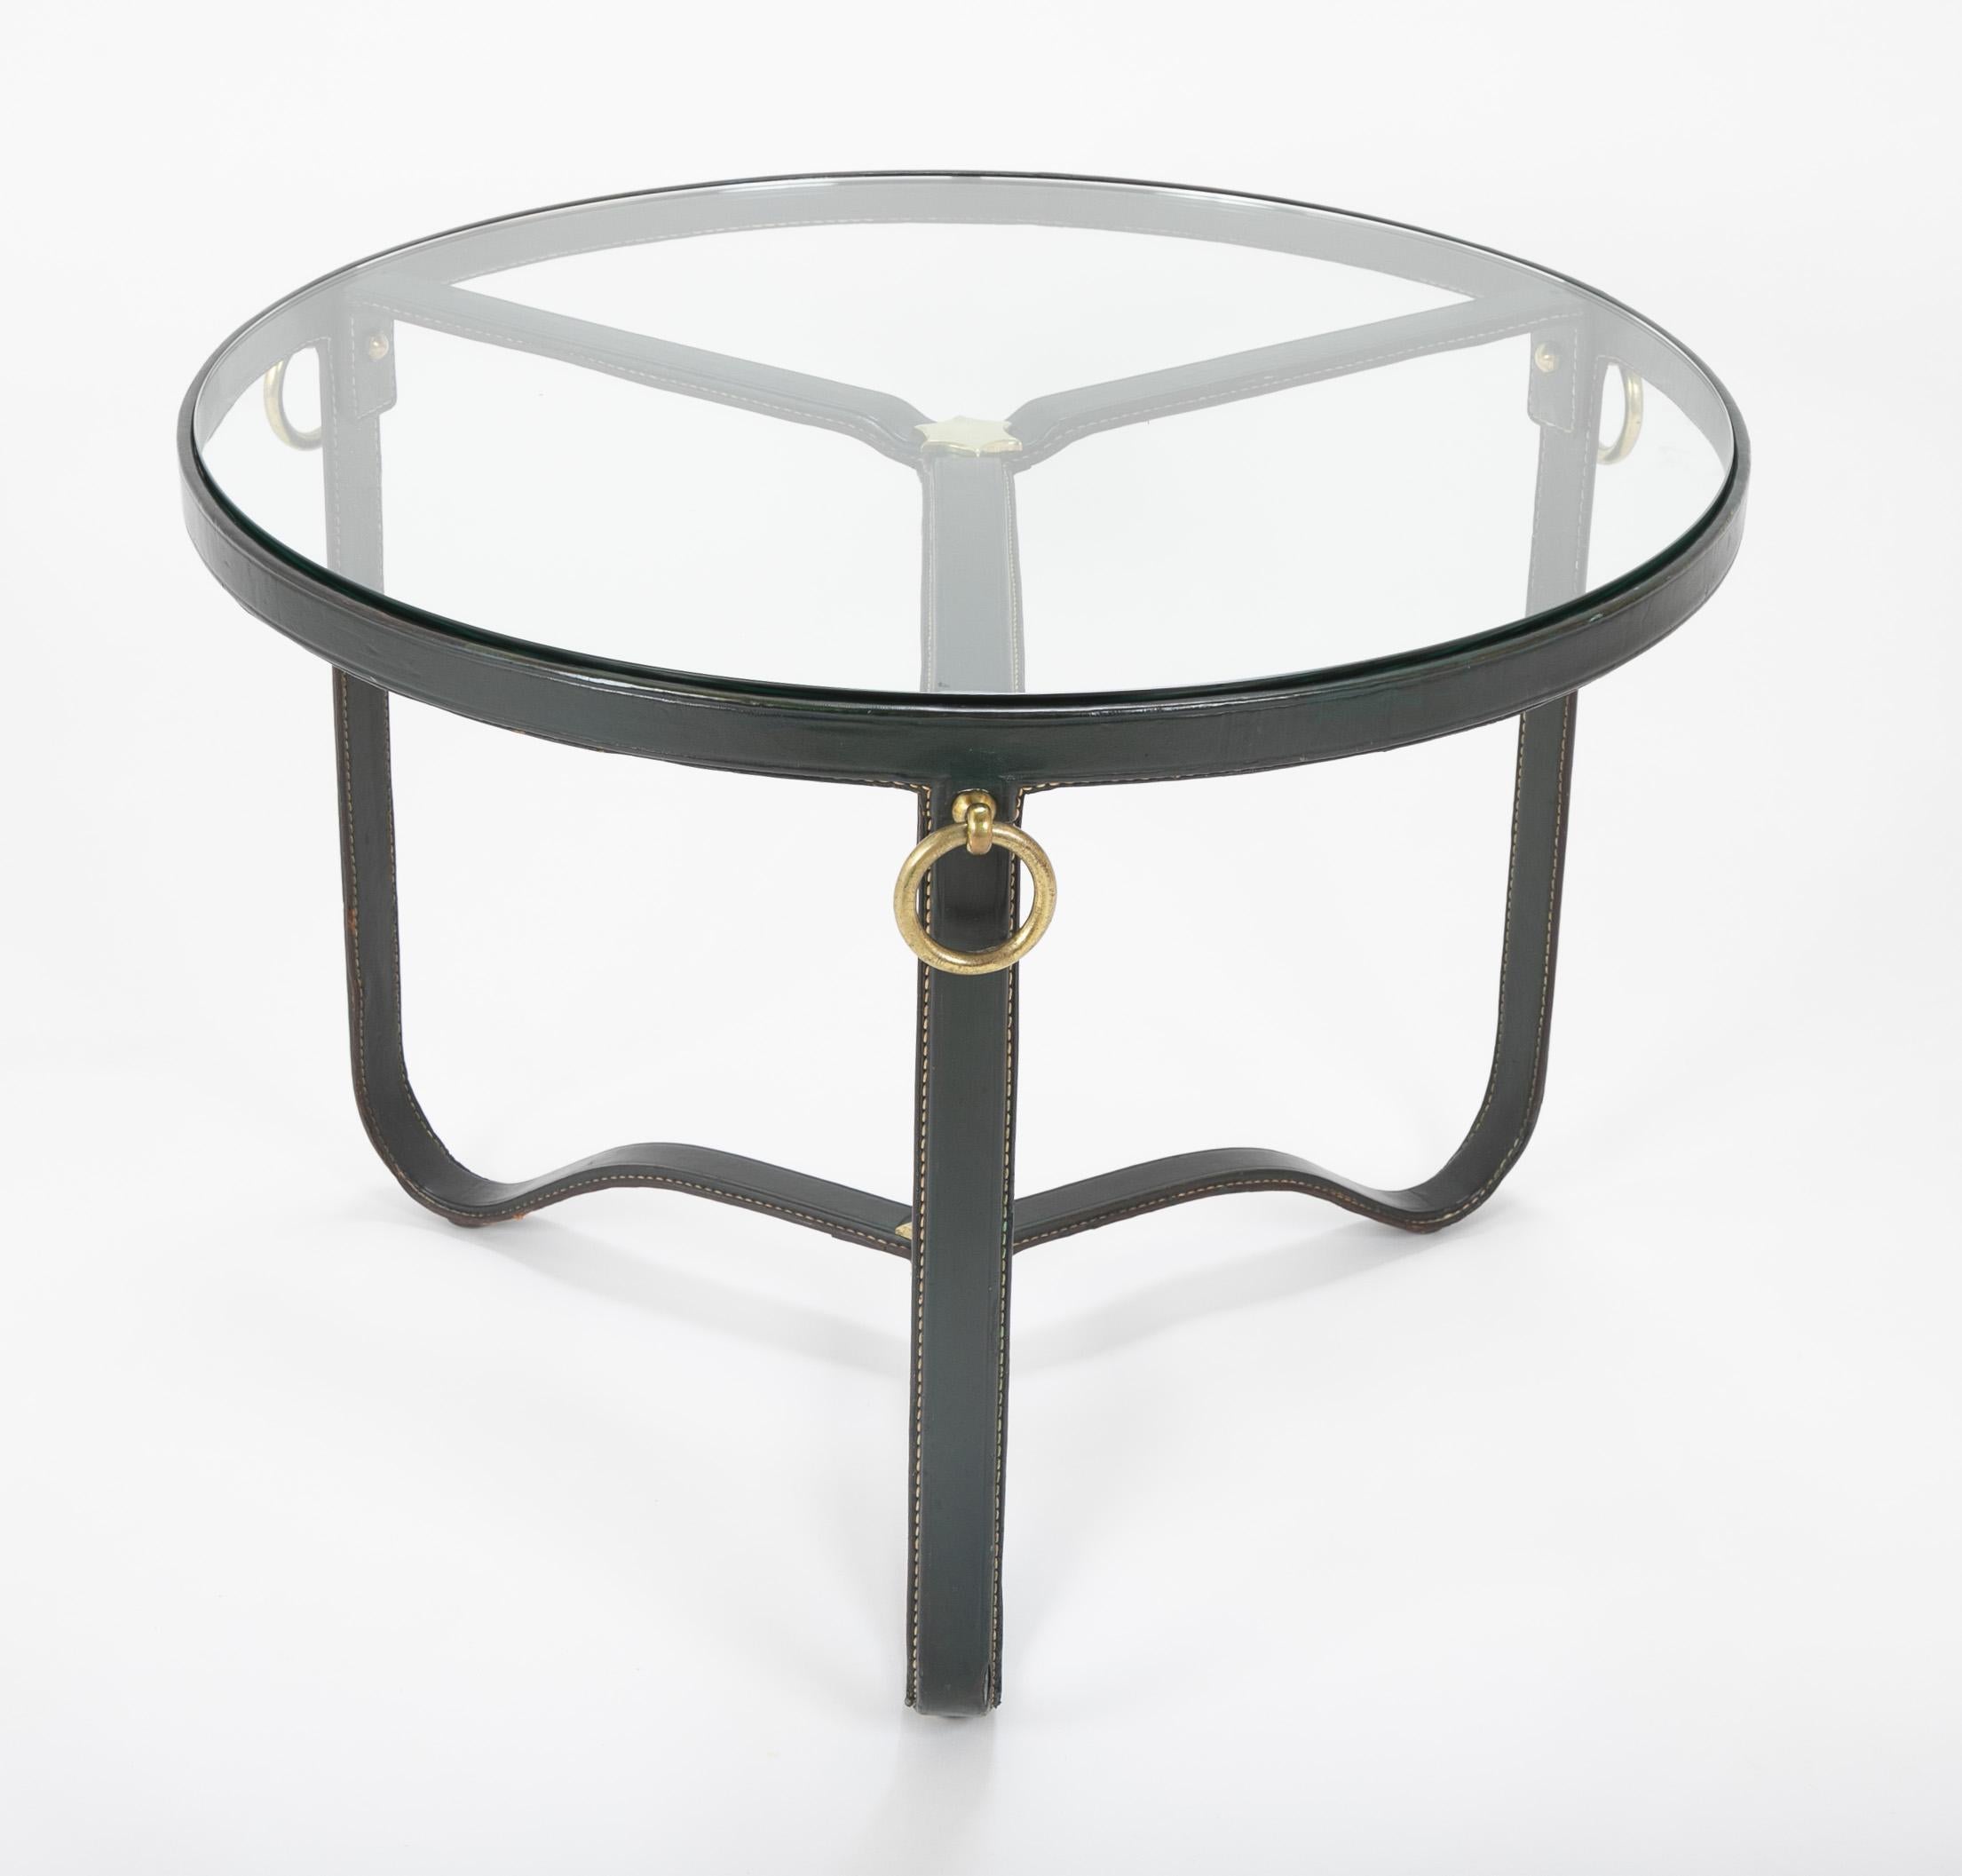 A striking coffee table in steel wrapped with green leather and handstitched designed by Jacques Adnet. Brass rings one match of the three legs along with brass stars at the center of both the upper and lower level. Glass top.
Model illustrated on